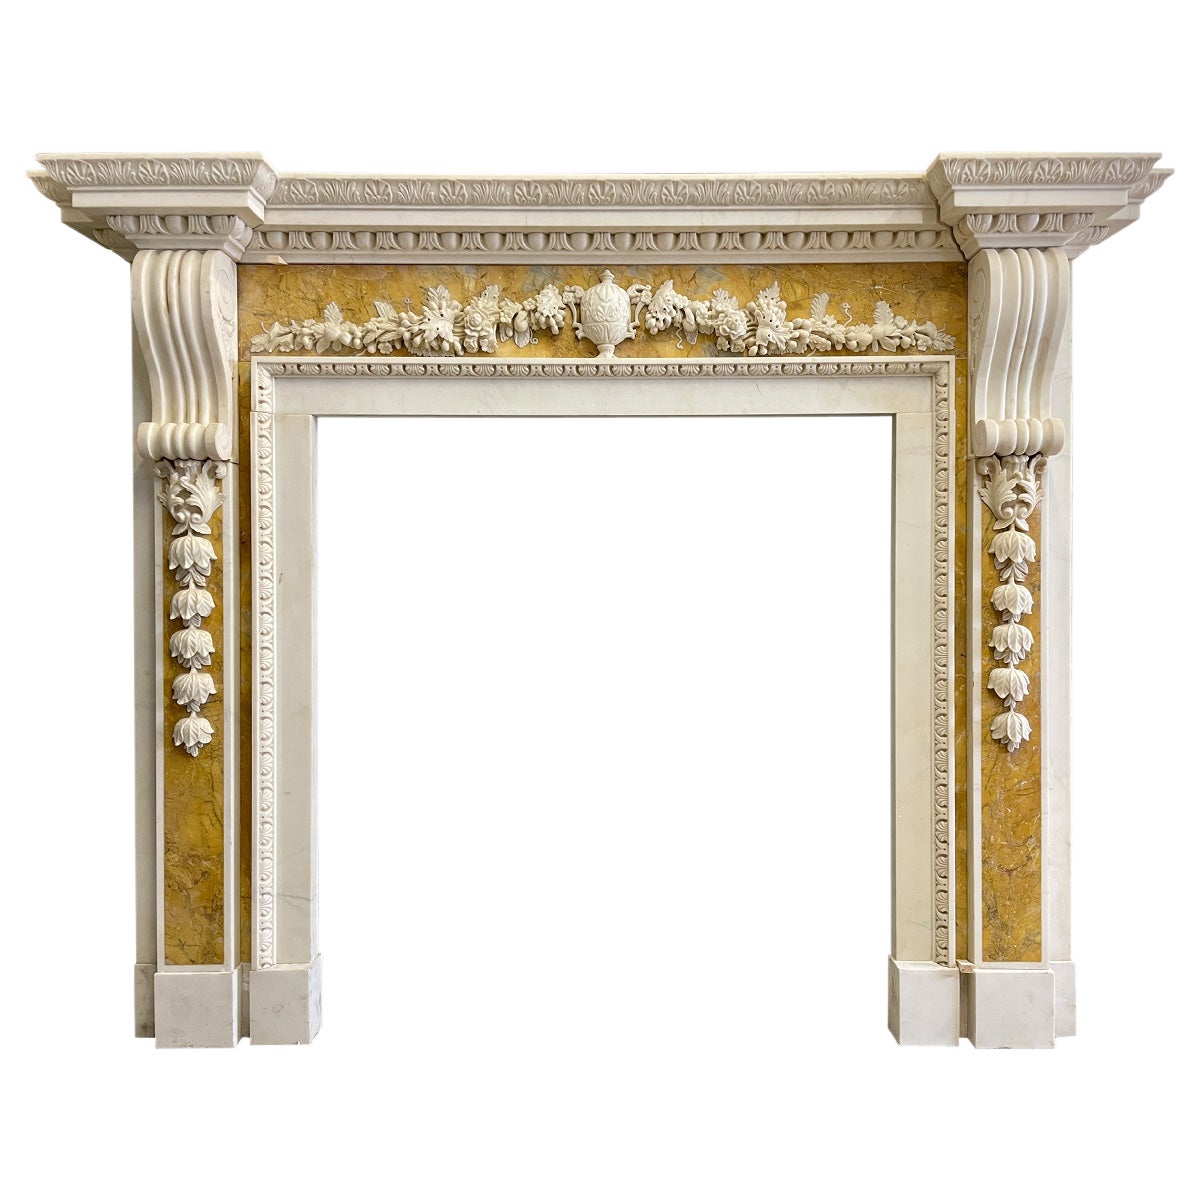 A Georgian Style White and Siena Marble Fireplace Mantel For Sale